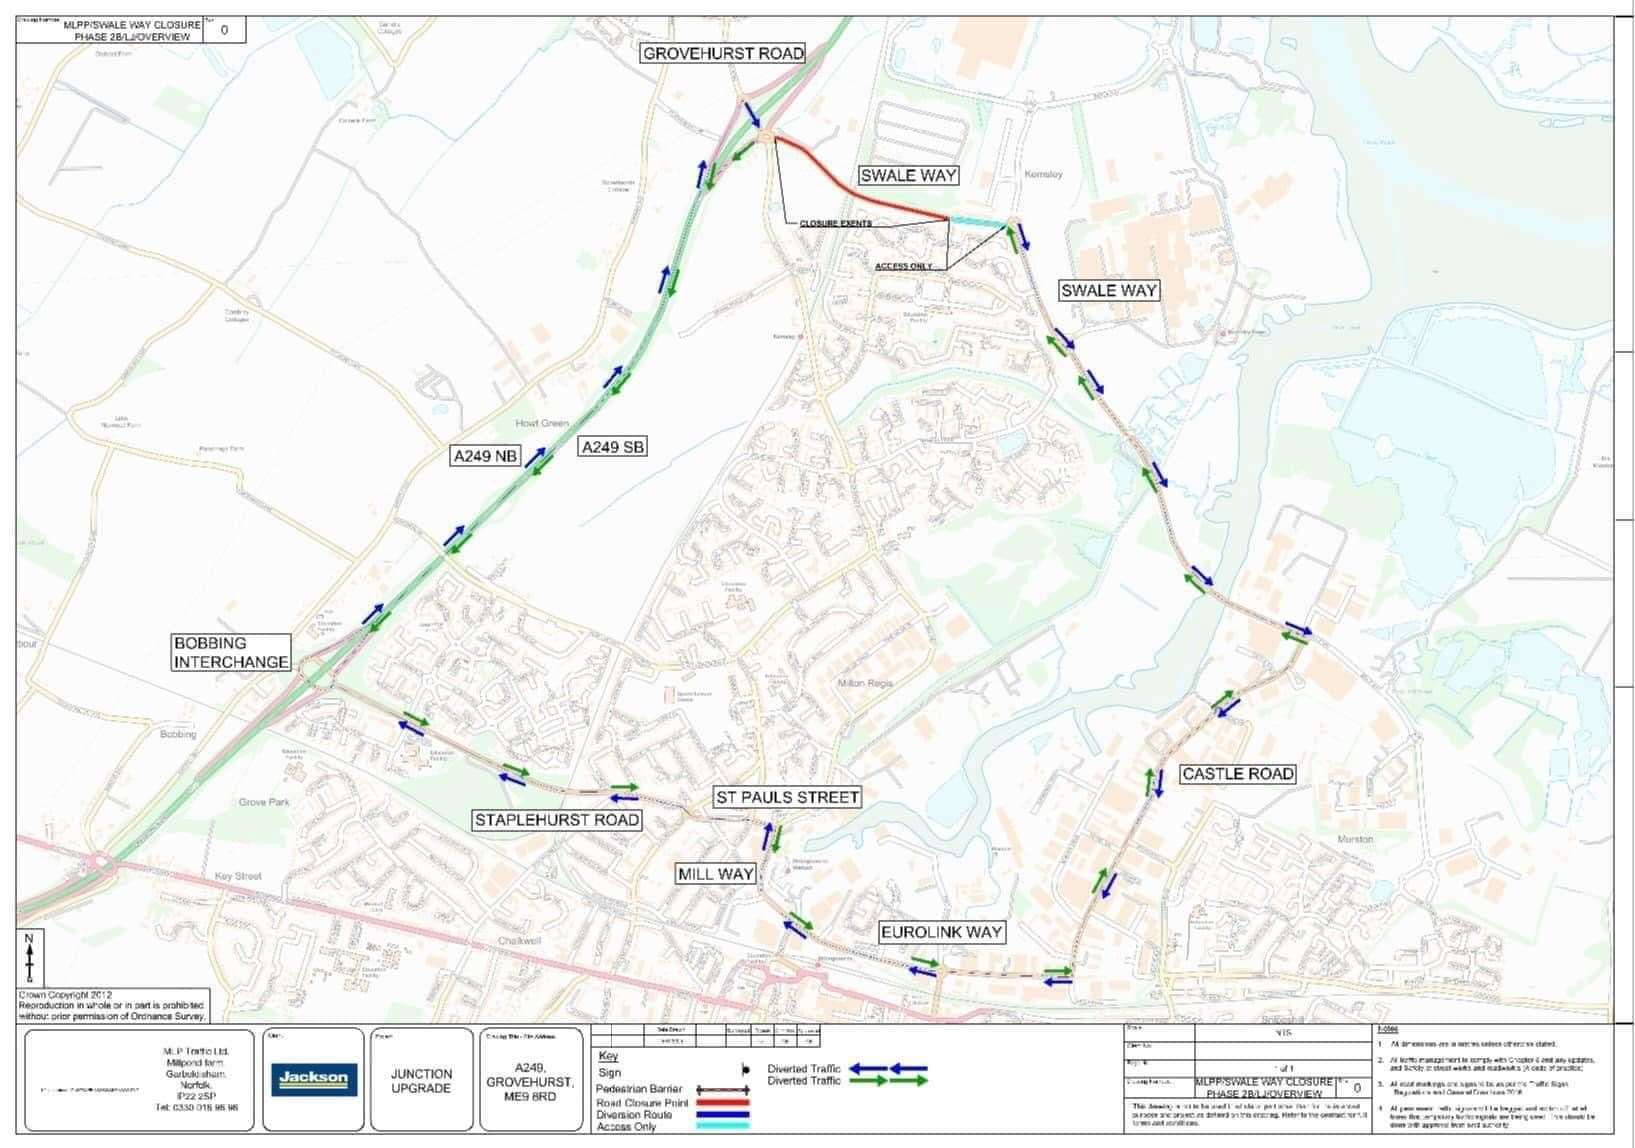 The diversion in place for the Sheppey Way closure this weekend